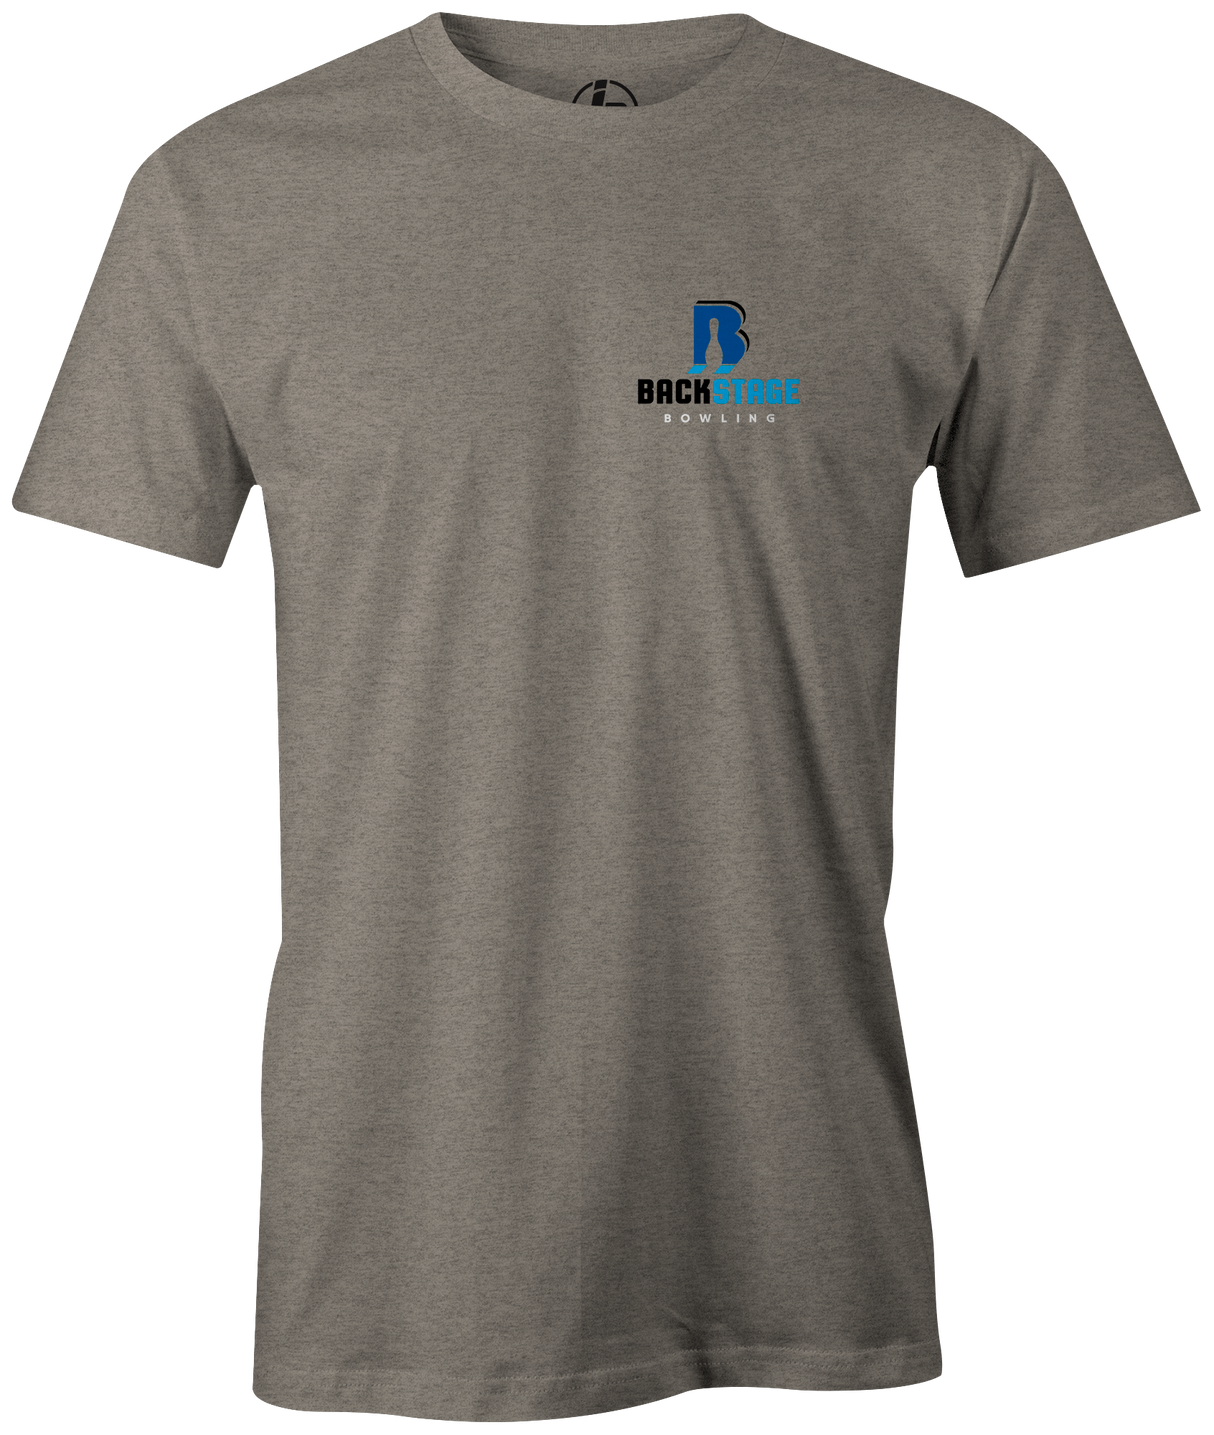 Backstage Bowling T-shirt, men's, gray, tee, tee-shirt, t shirt, apparel, merch, practice, lanes, free shipping, discount, cheap, coupon, shannon o'keefe, bryan o'keefe, mike jasnau, mike shady, coaching, membership, cool, vintage, authentic, original